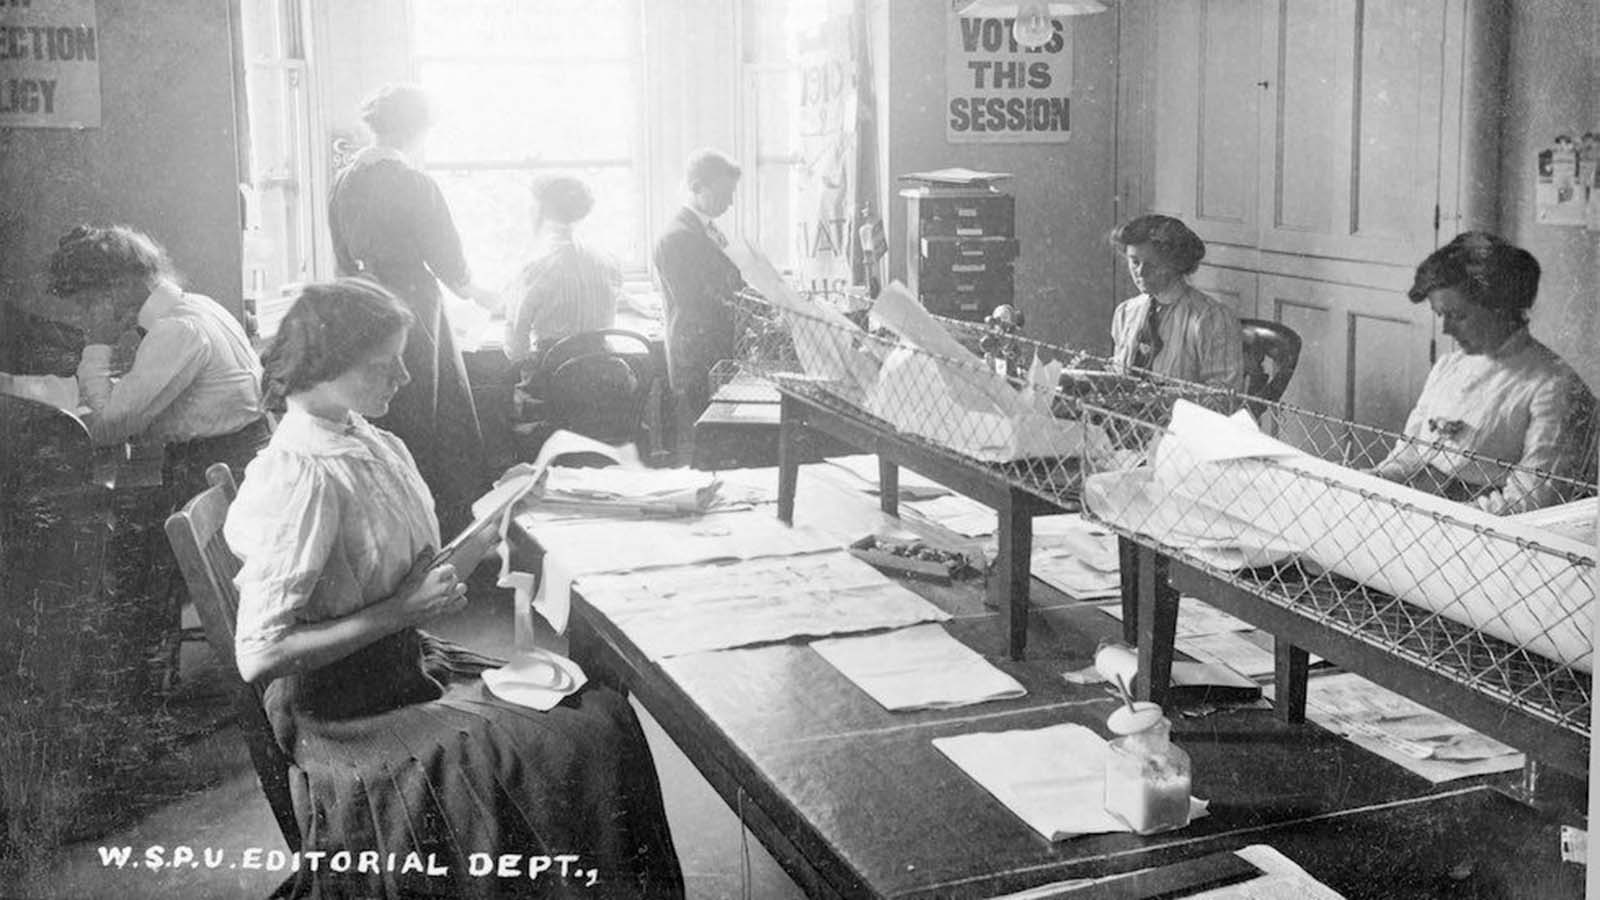 Women in the editorial department of Clement's Inn, The Strand, London. That week's edition of 'Votes for Women' is being cut and pasted by the young woman volunteers at the 'making-up table.' All the woman have long hair tied up in loose buns. Most of the woman wear white blouses and full skirts — two wear neck ties. 1911